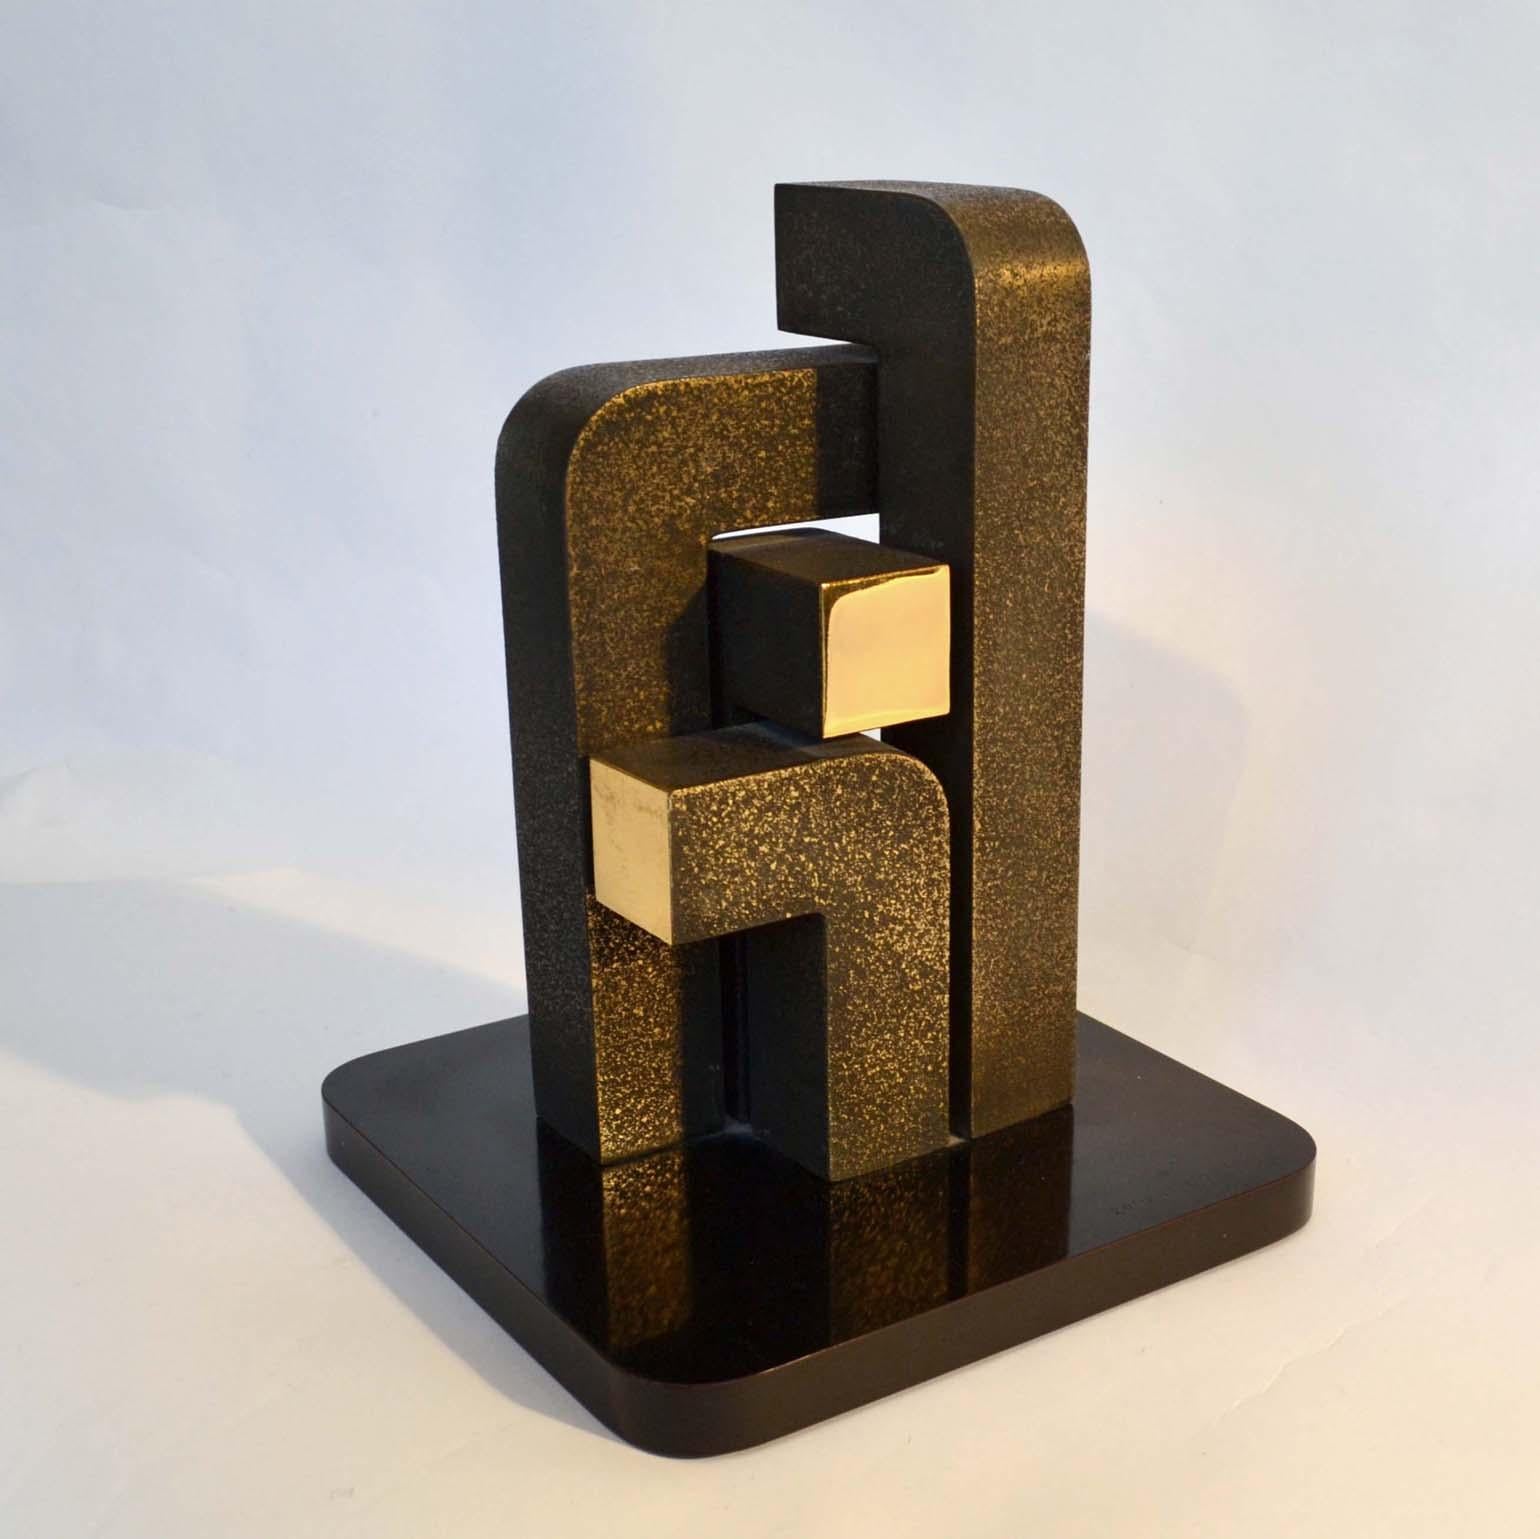 Abstract Geometric Minimalist Bronze Sculpture by Zonena 1979 in Limited Edition 9